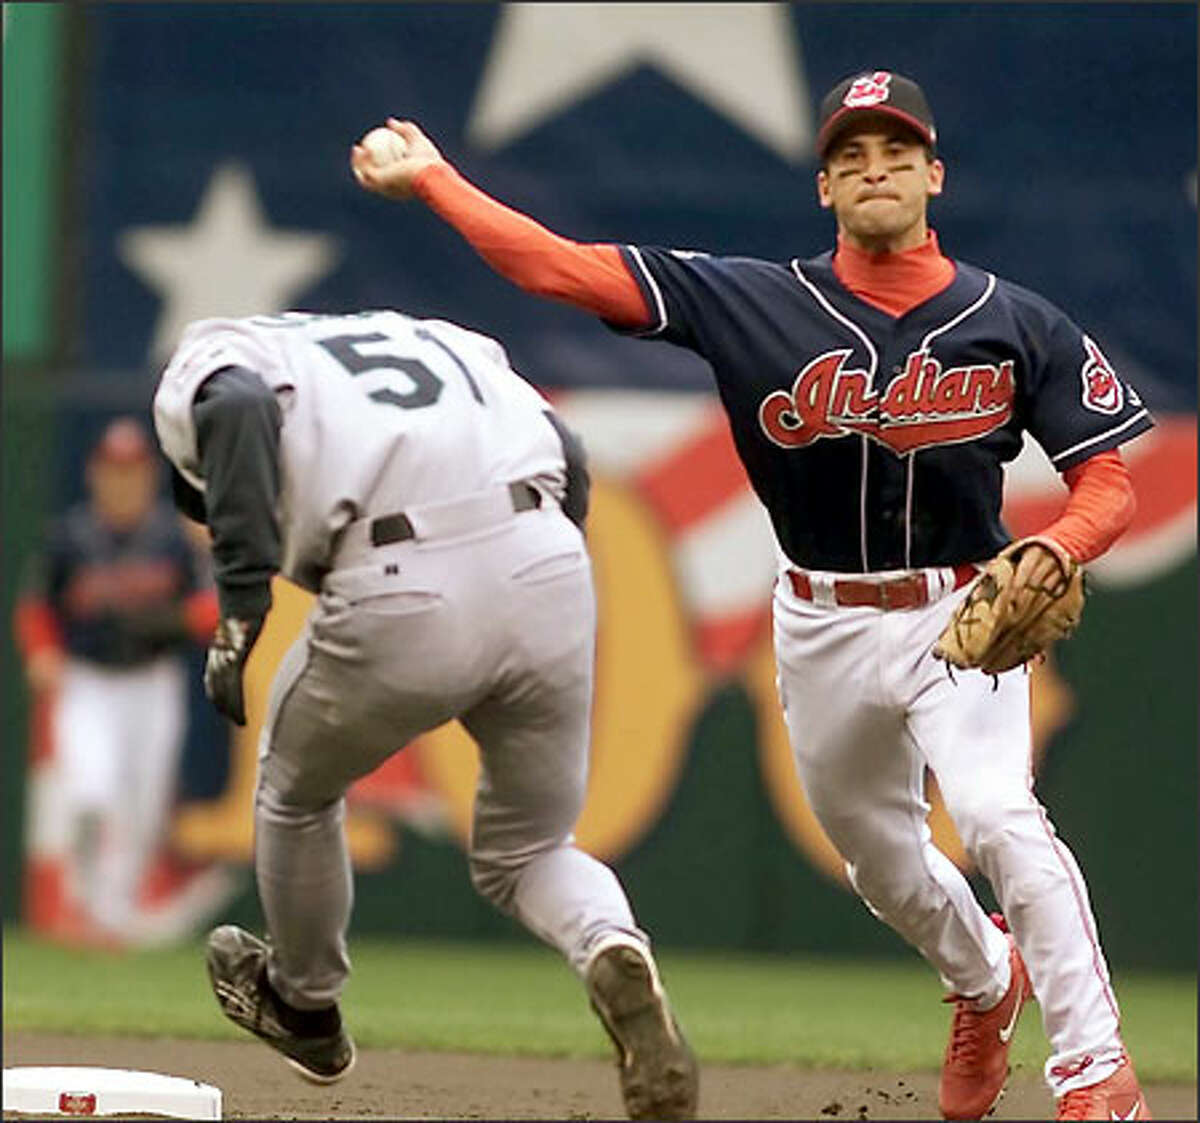 Ichiro ducks but is out at second as Cleveland shortstop Omar Vizquel turns the double play in the first inning of play.